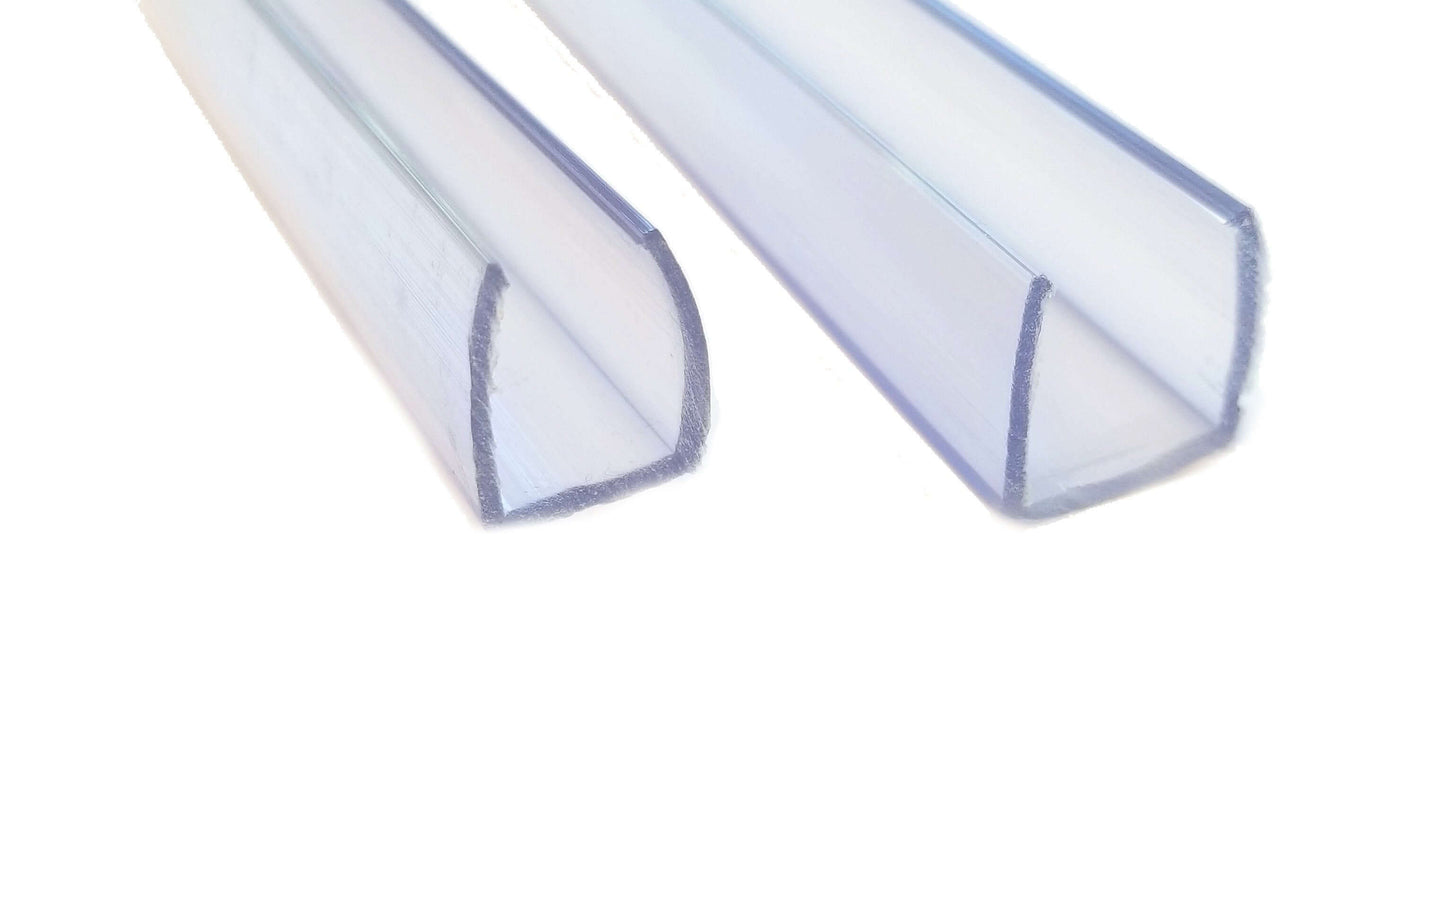 two pieces of clear pvc led channel in different widths; thinner on left, wider on right